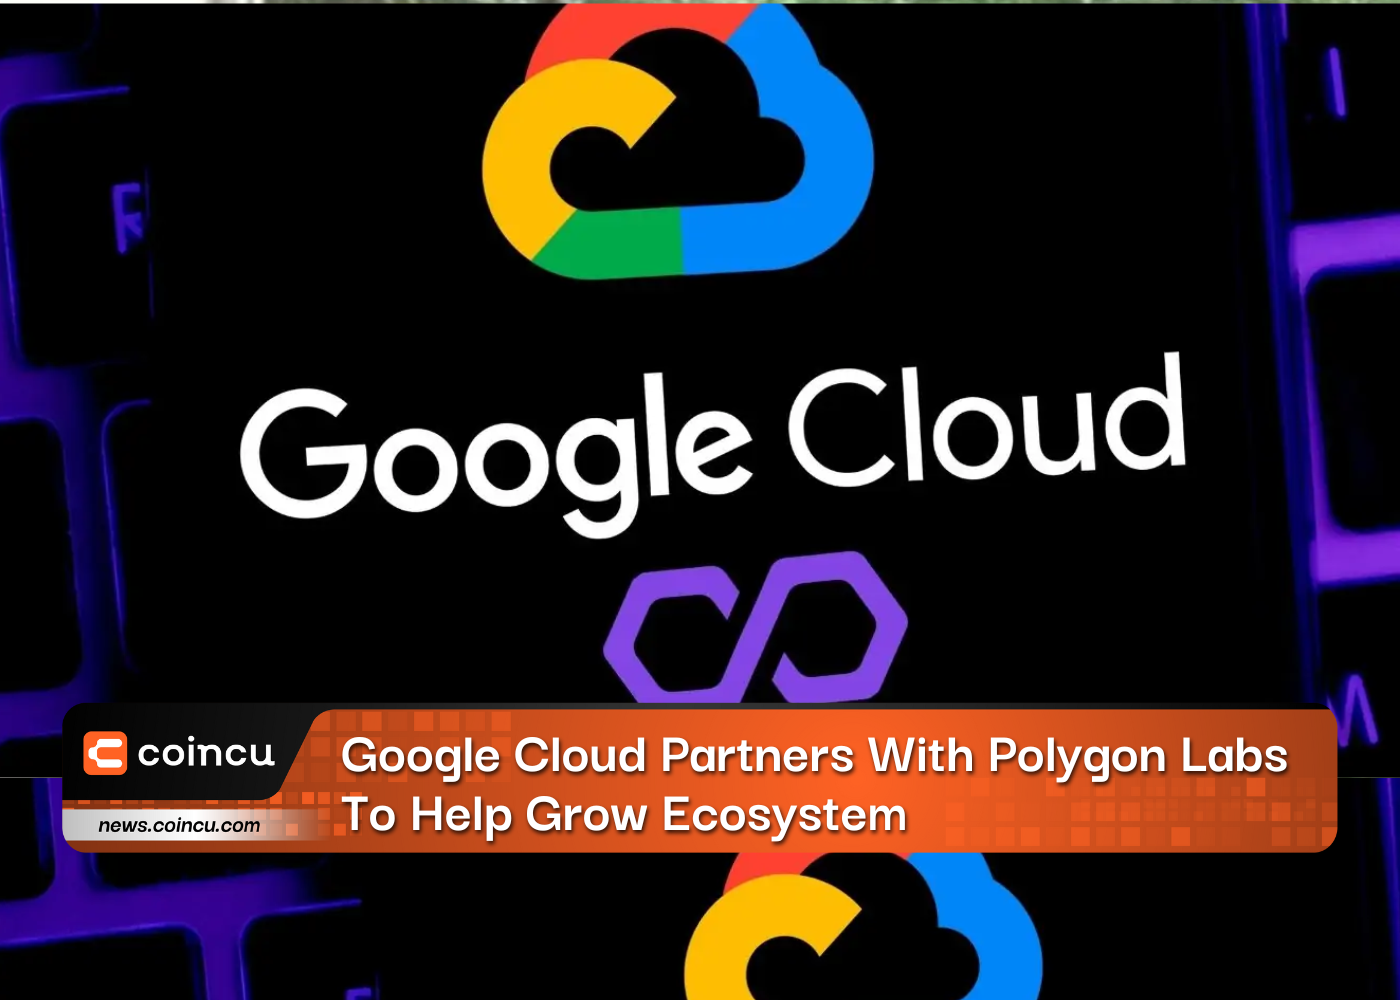 Google Cloud Partners With Polygon Labs To Help Grow Ecosystem